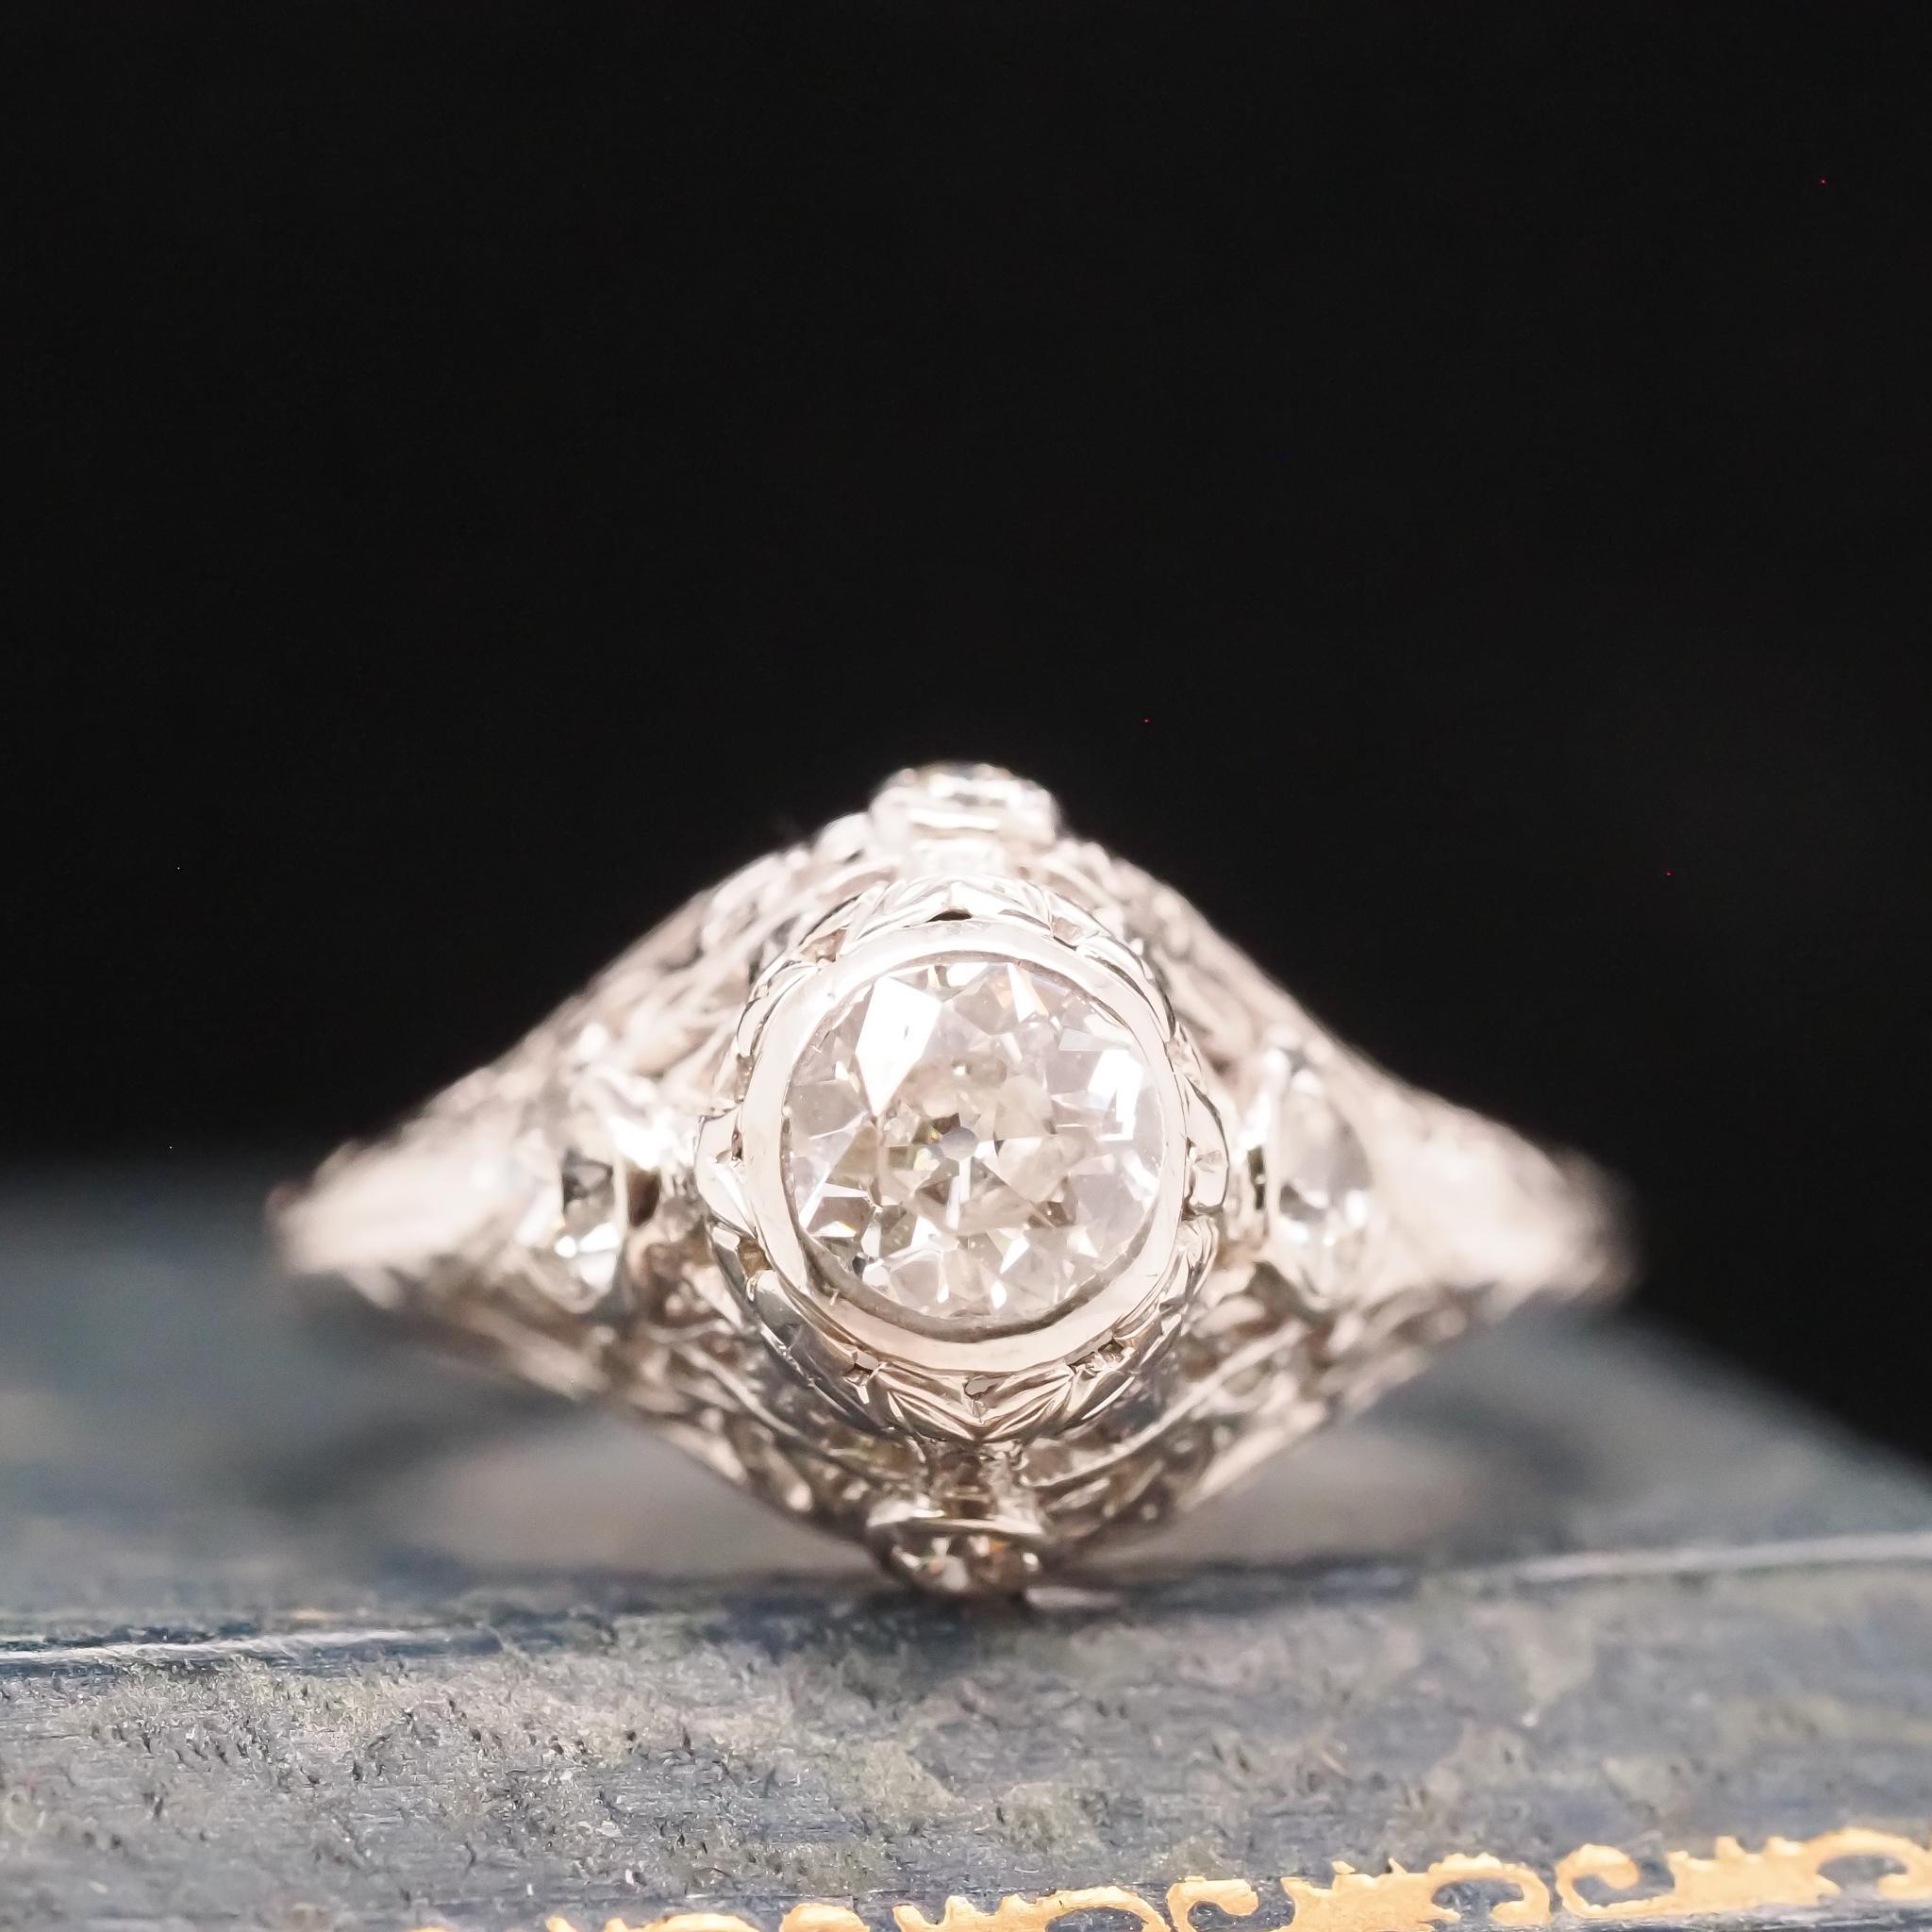 Year: 1922 (Engraved inner shank)
Item Details:
Ring Size: 4.5 (Sizable)
Metal Type: Platinum [Hallmarked, and Tested]
Weight: 3.7 grams
Diamond Details: .50ct, total weight. Old European Brilliant. H Color, VS Clarity
Band Width: 1.55mm
Condition: